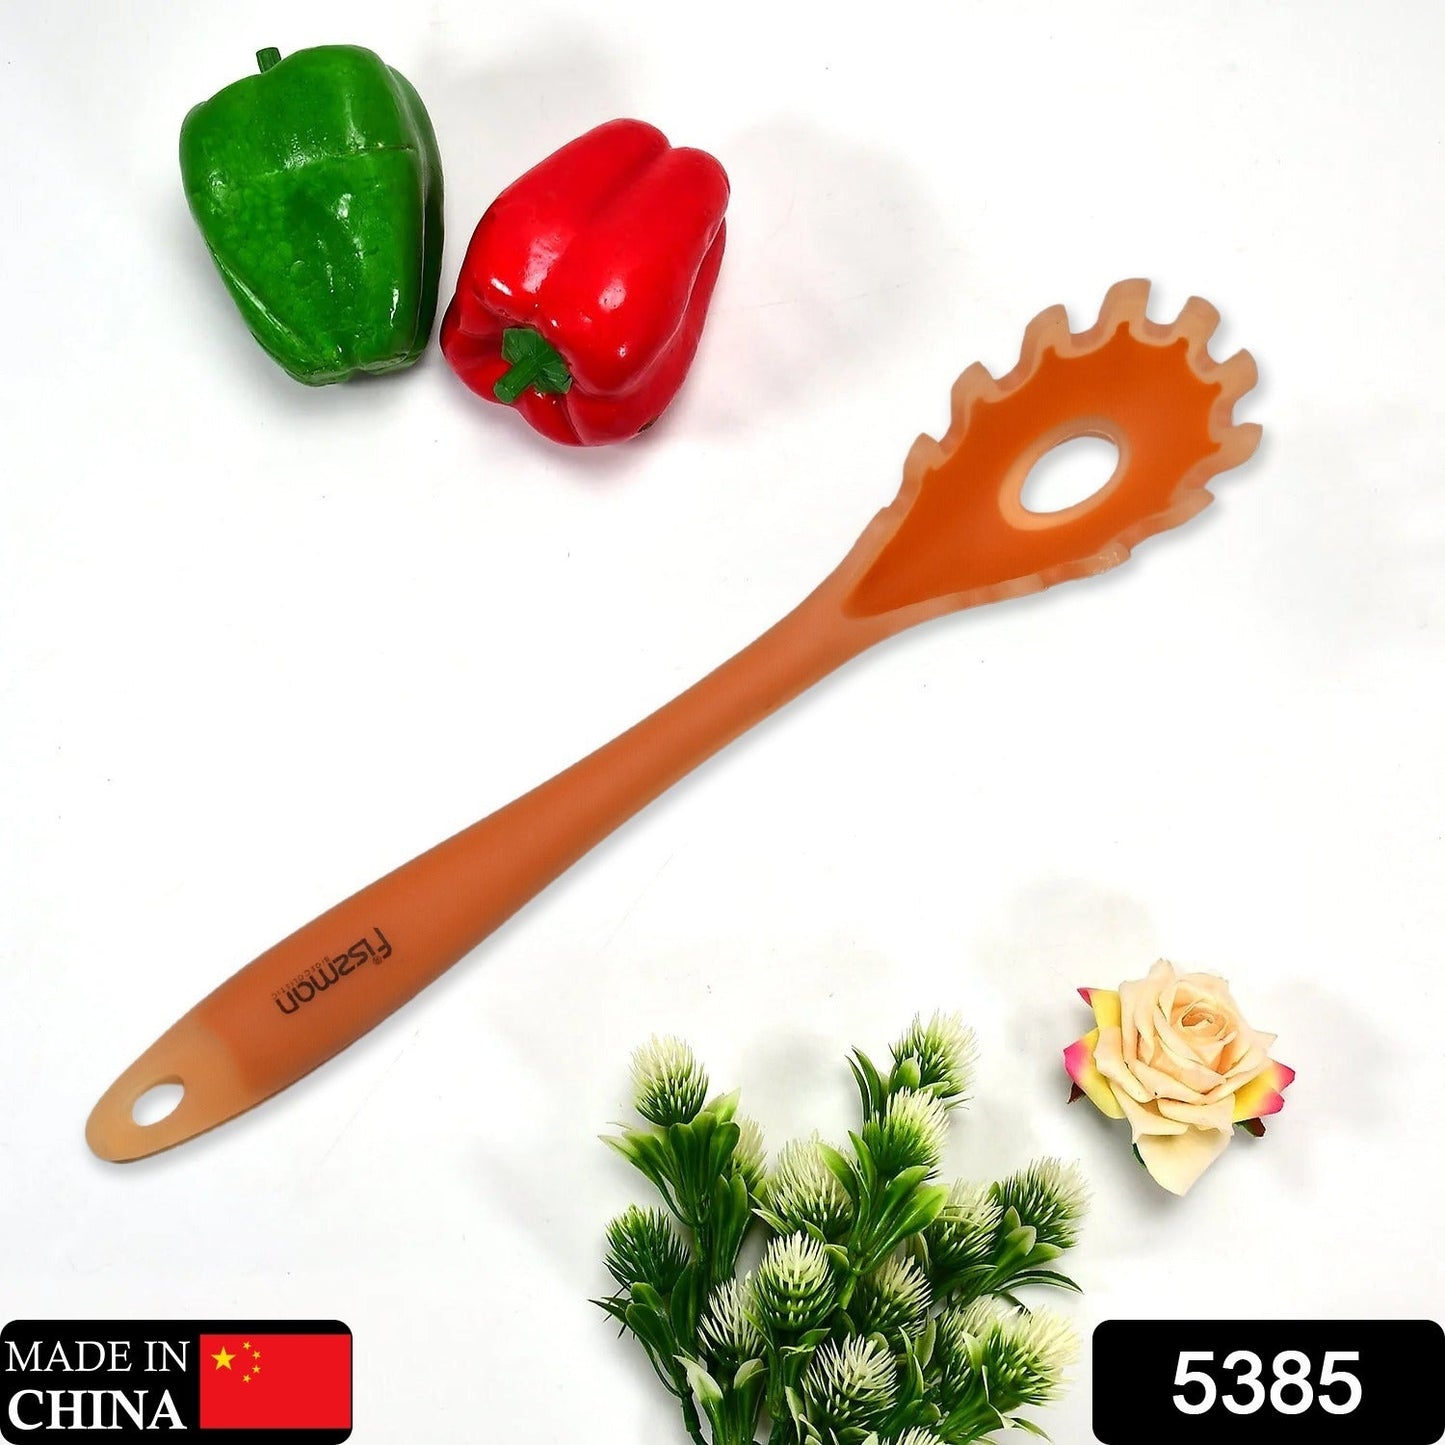 5385 Salad tongs Kitchenware Set Silicone Spoon Baking Kitchen Tools Non-stick Reclaimable Silicone Spatula Spoon Silicone Kitchen Cookware Item - SWASTIK CREATIONS The Trend Point SWASTIK CREATIONS The Trend Point